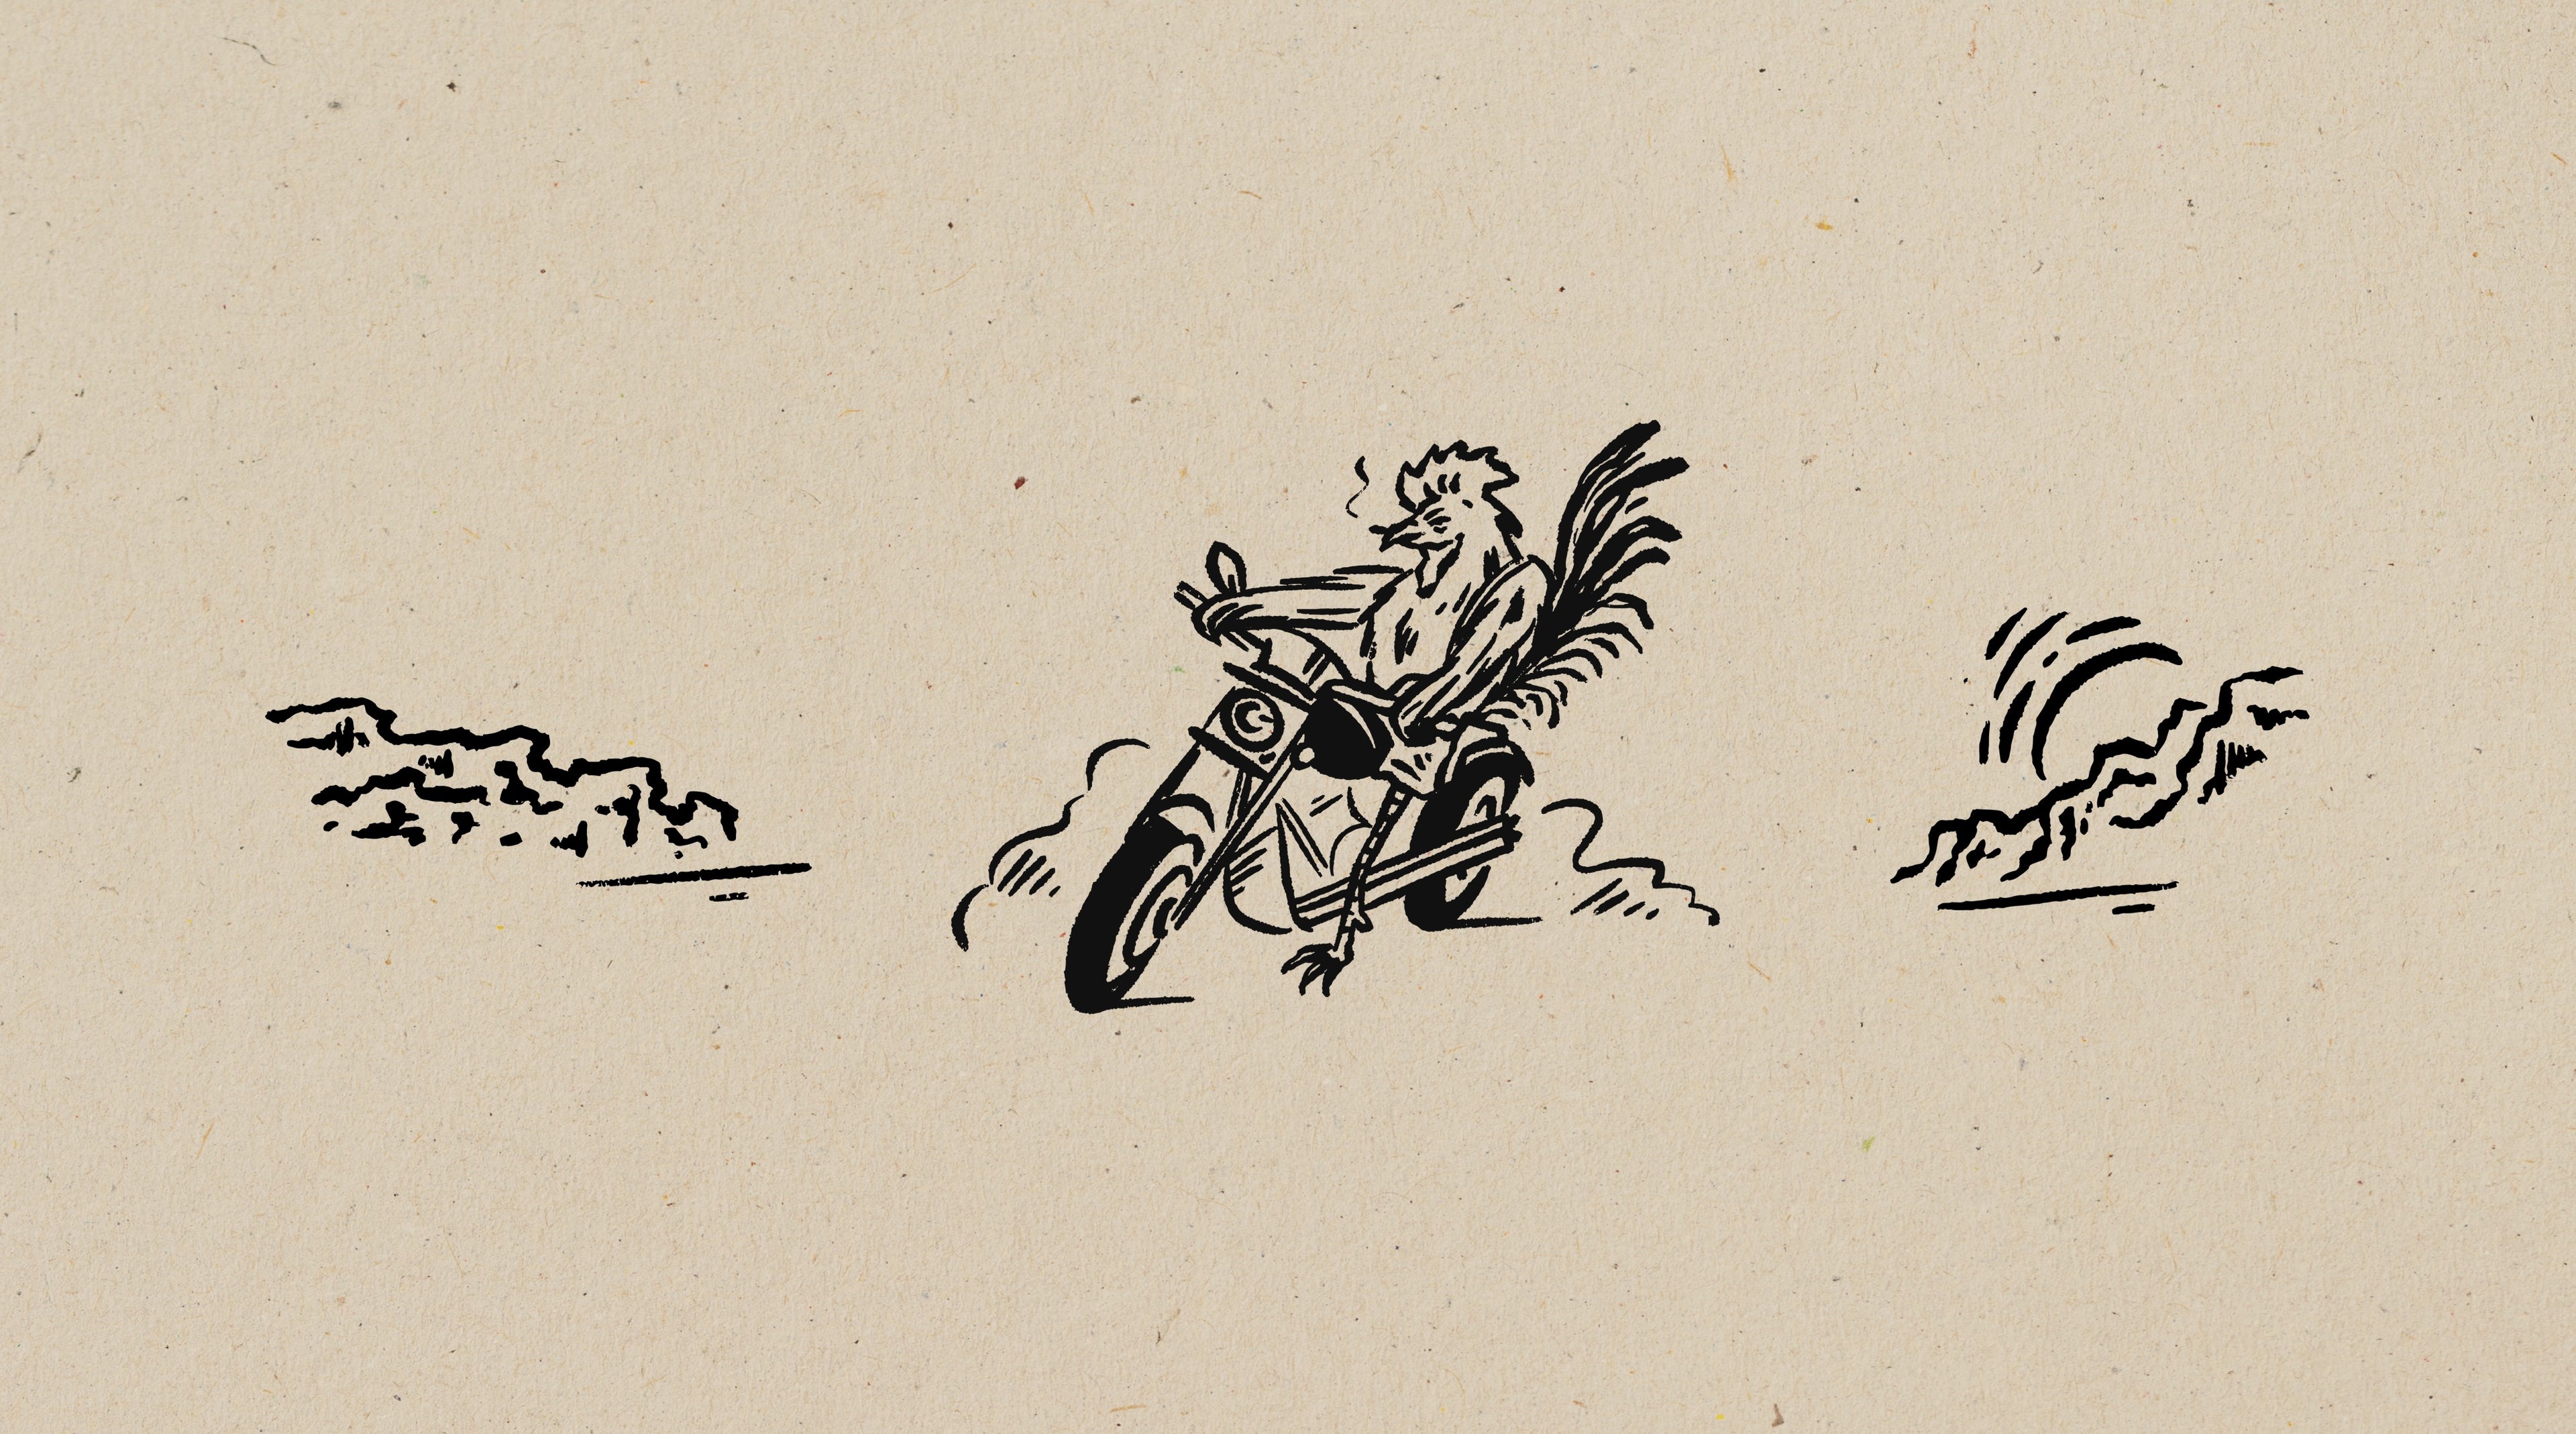 Drawing of a chicken on motorcycle